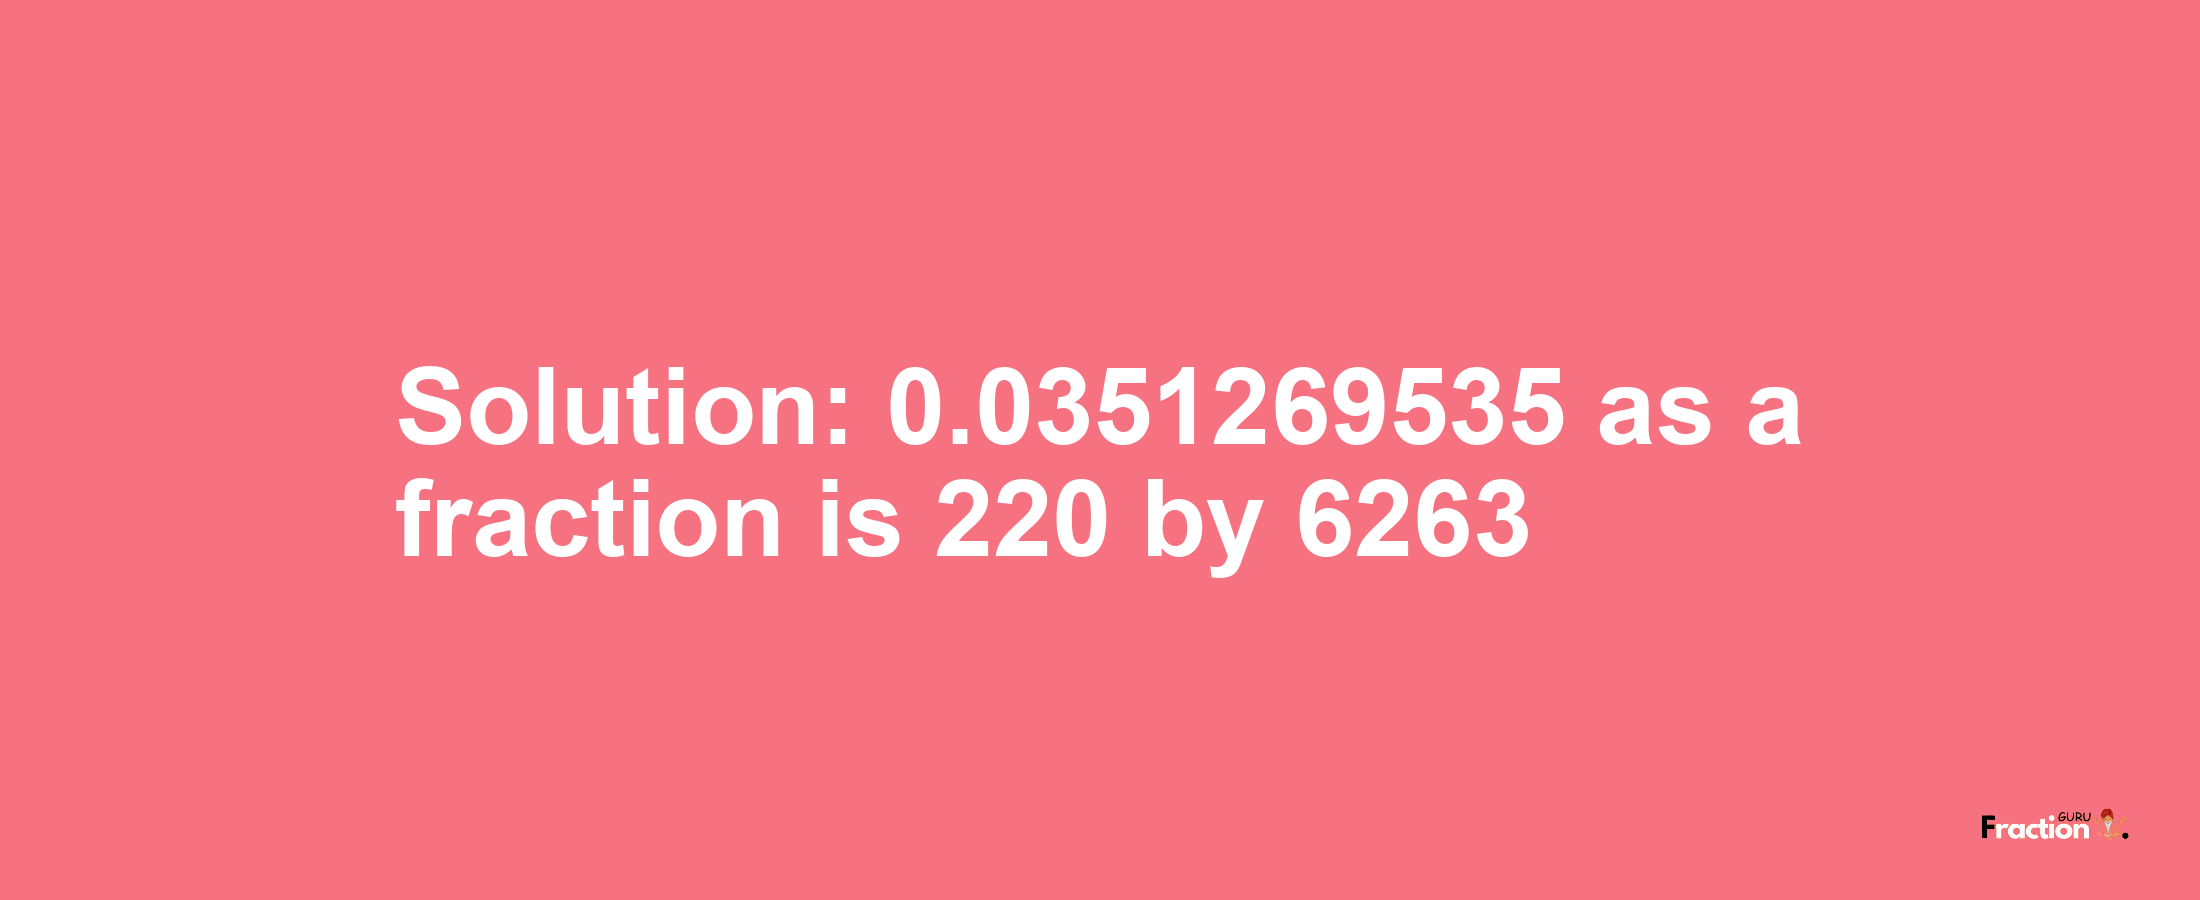 Solution:0.0351269535 as a fraction is 220/6263